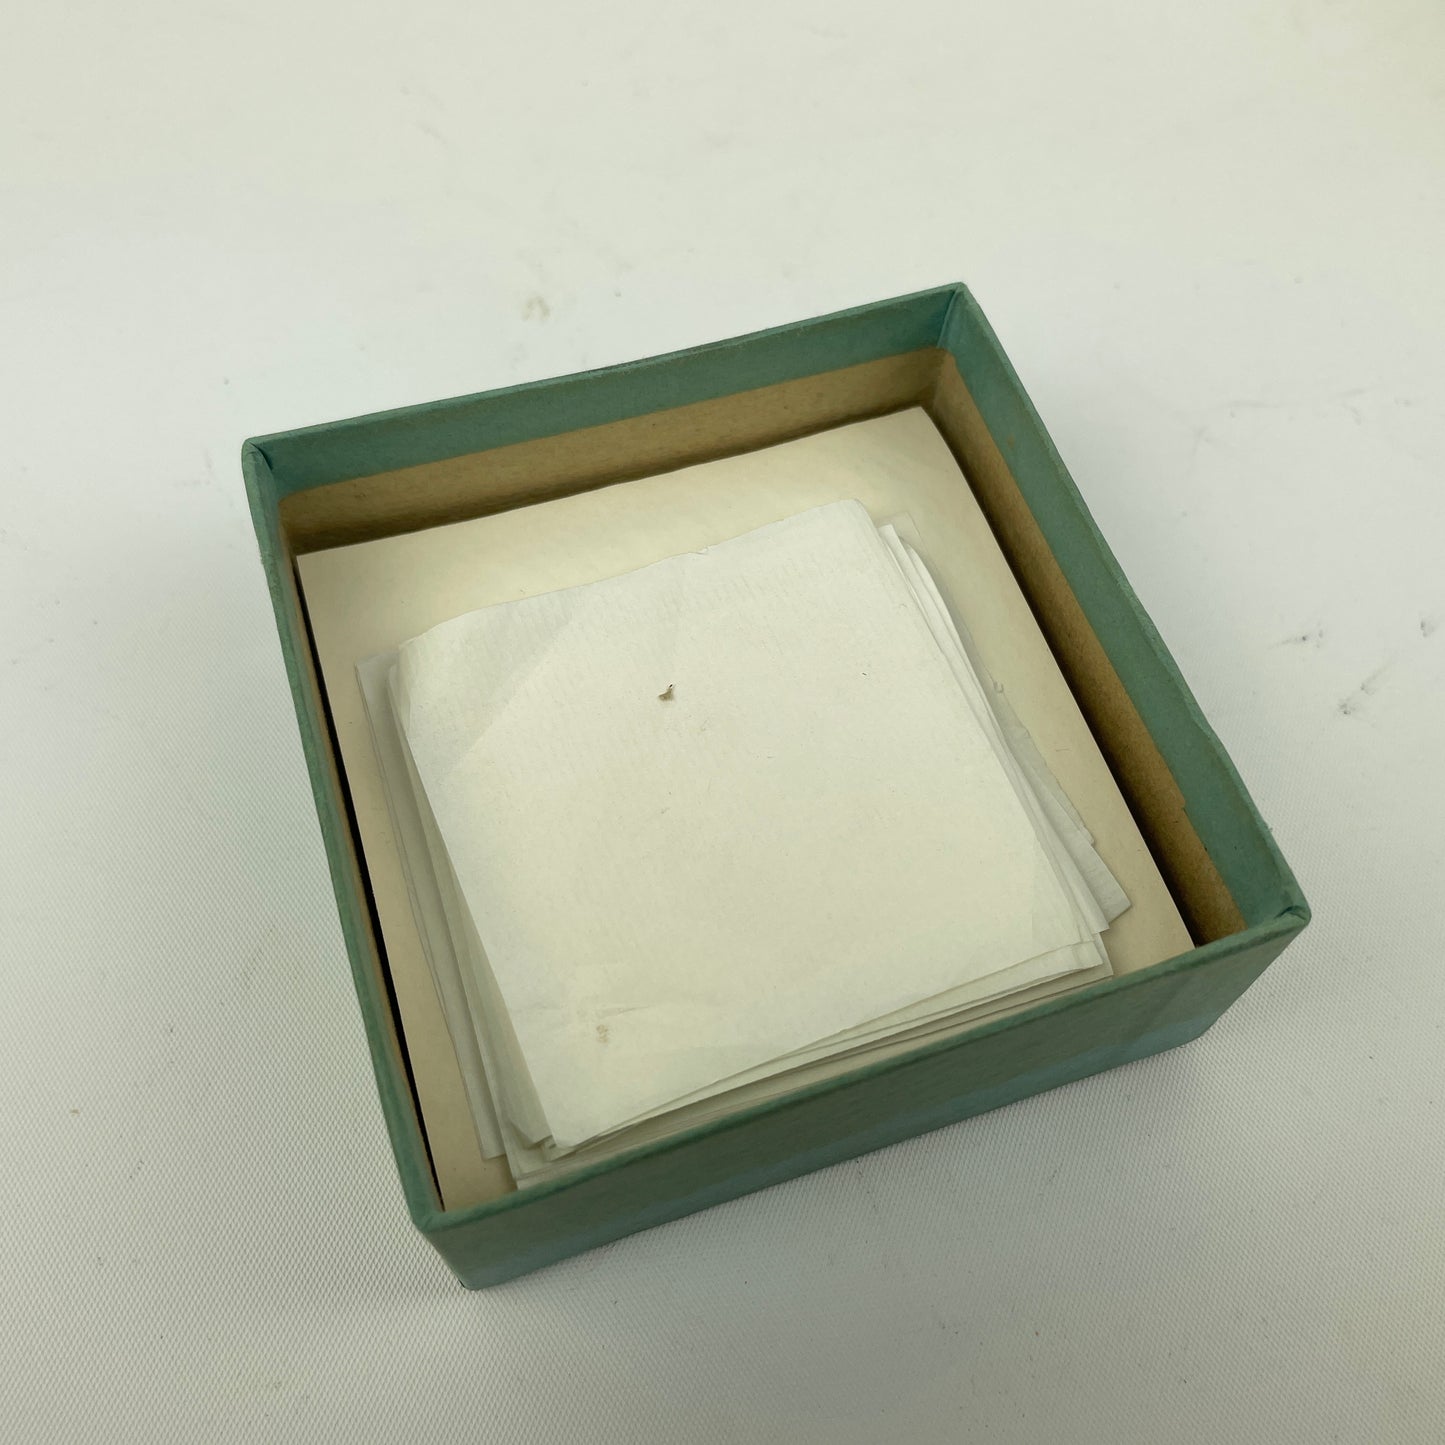 Lot 27 - Watch Paper, 2 Boxes